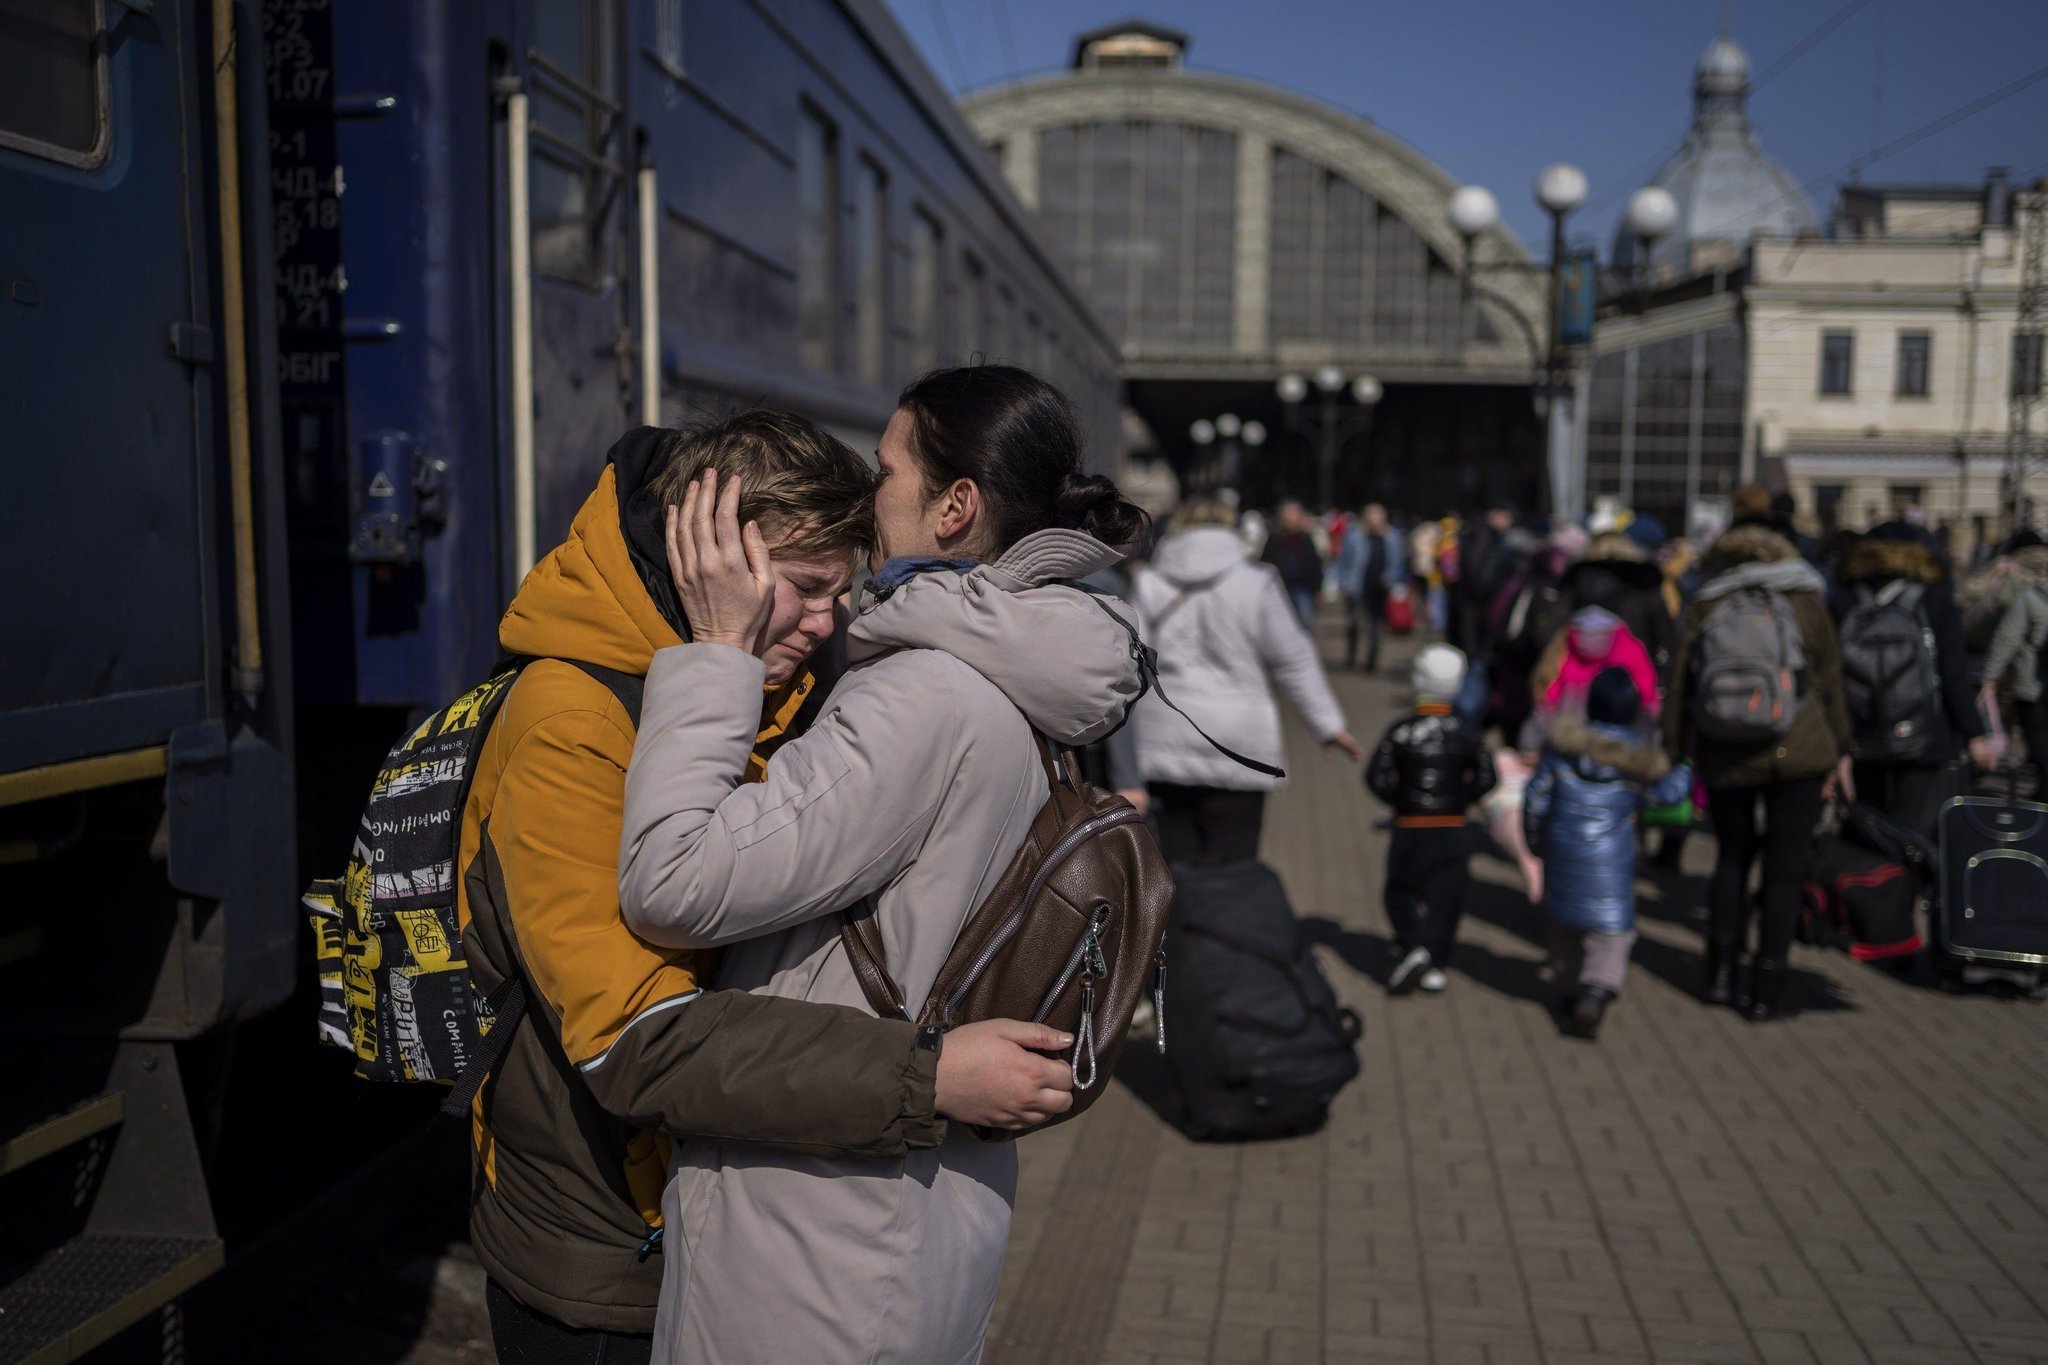 Sandra Chapman writes about why the war in Ukraine is particularly tough on women and children